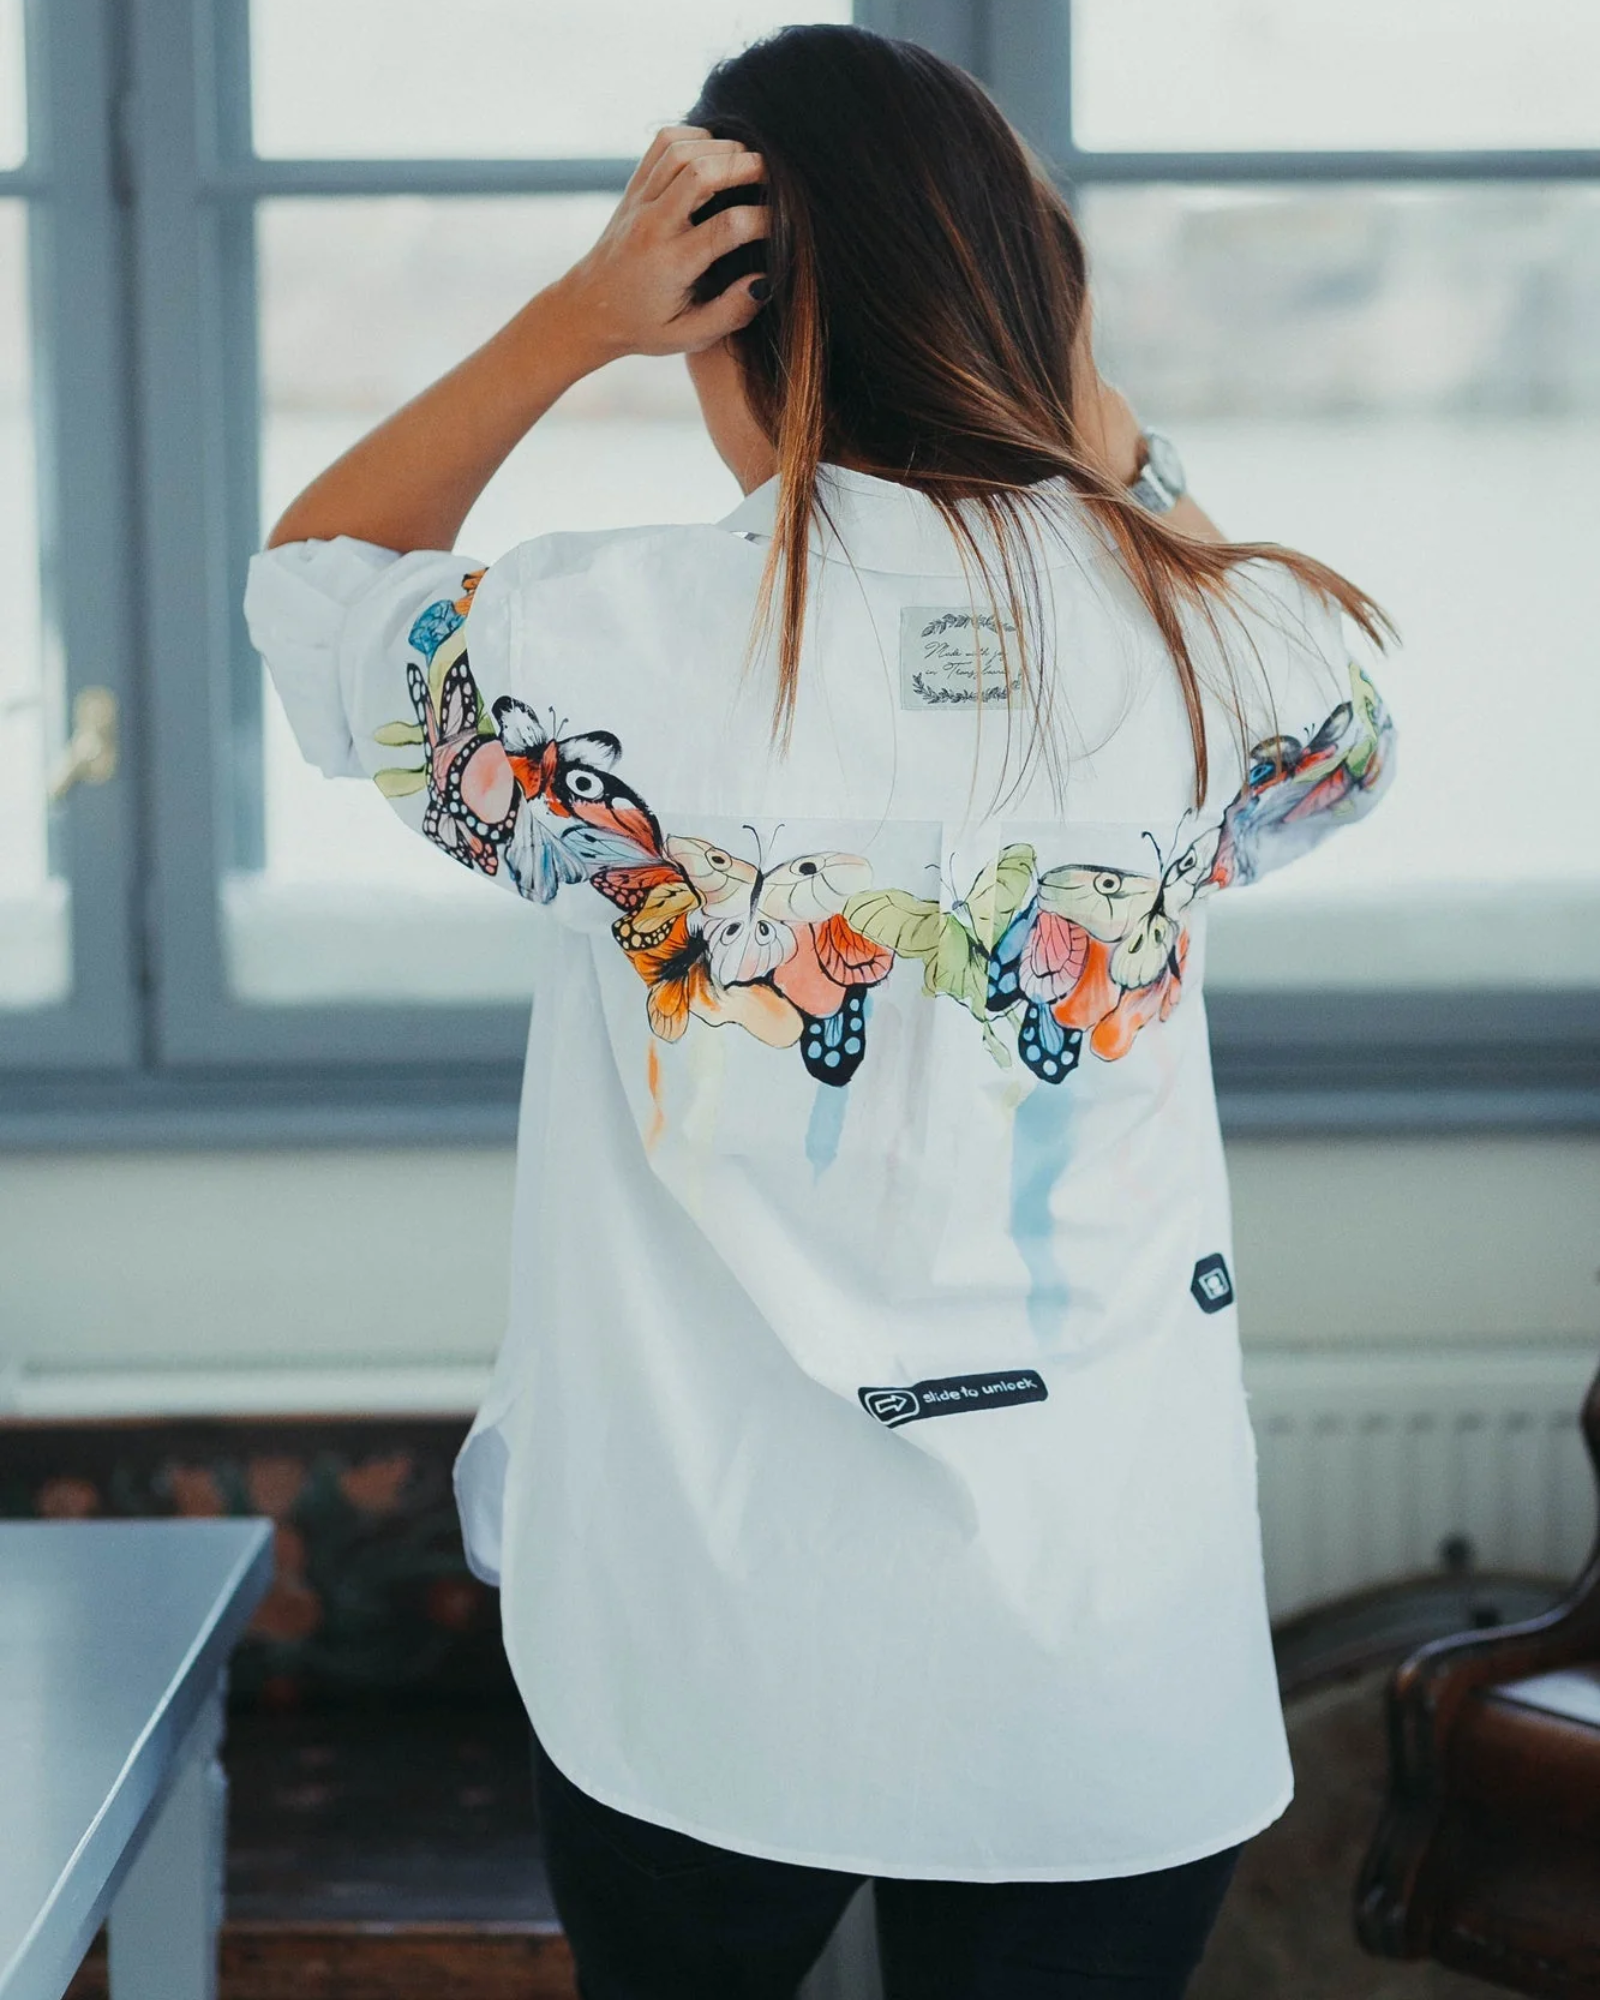 Oversized personalized shirt with butterflies "Butterfly effect"